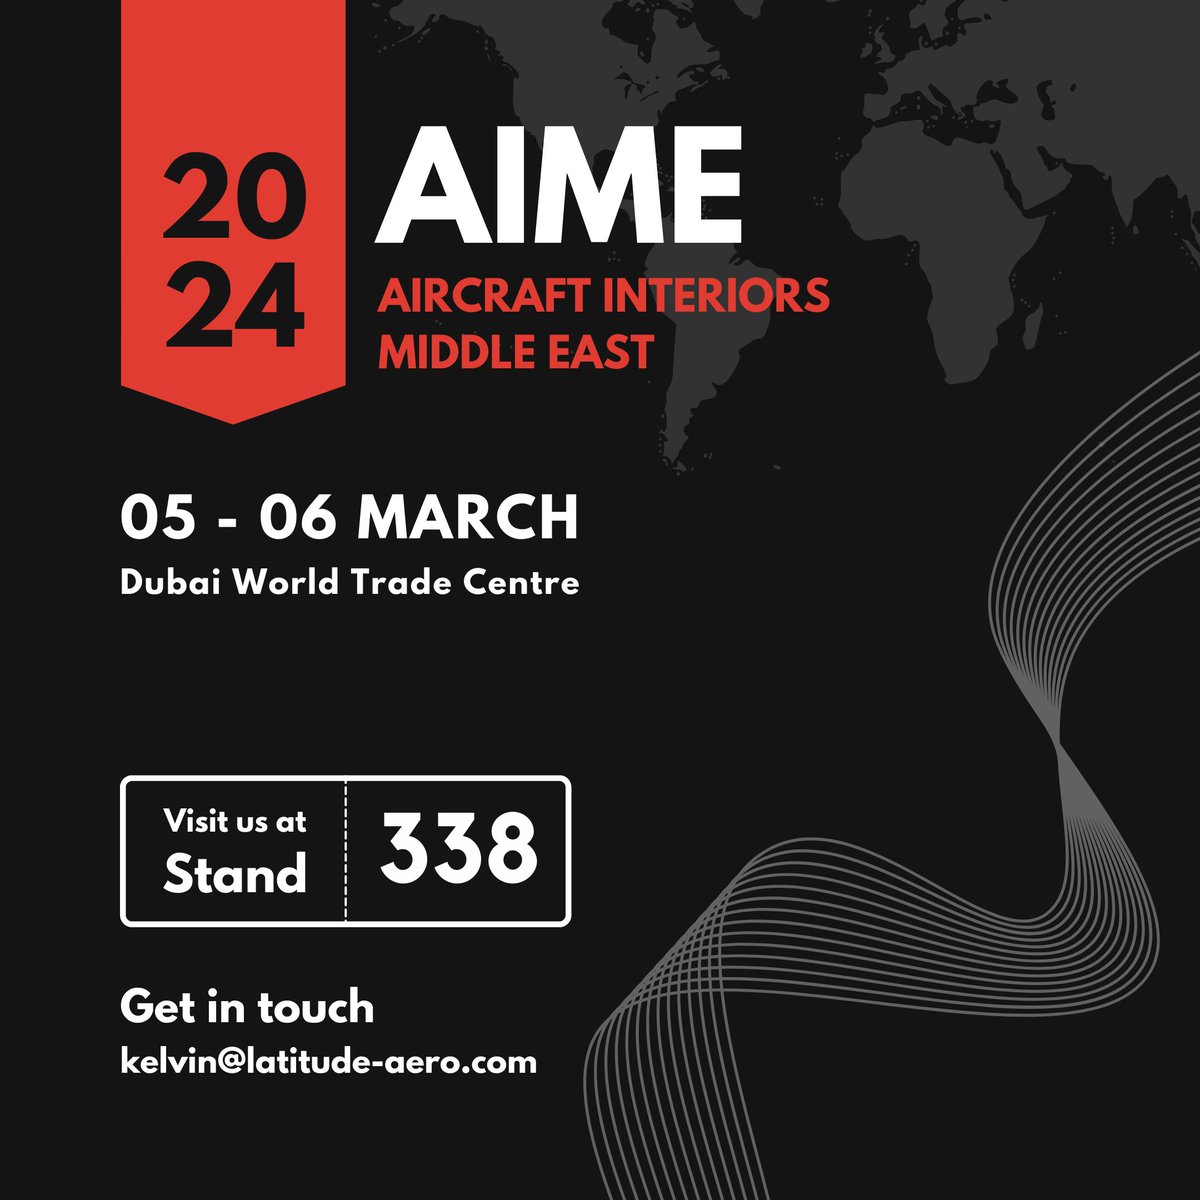 We're kicking off the trade show season in Dubai with Aircraft Interiors Middle East. Don't miss the opportunity to #connect; reach out to kelvin@latitude-aero.com to schedule your meeting today. ✈️ #AIME #MROME #MRO #Dubai #Aviation #avgeek #paxex